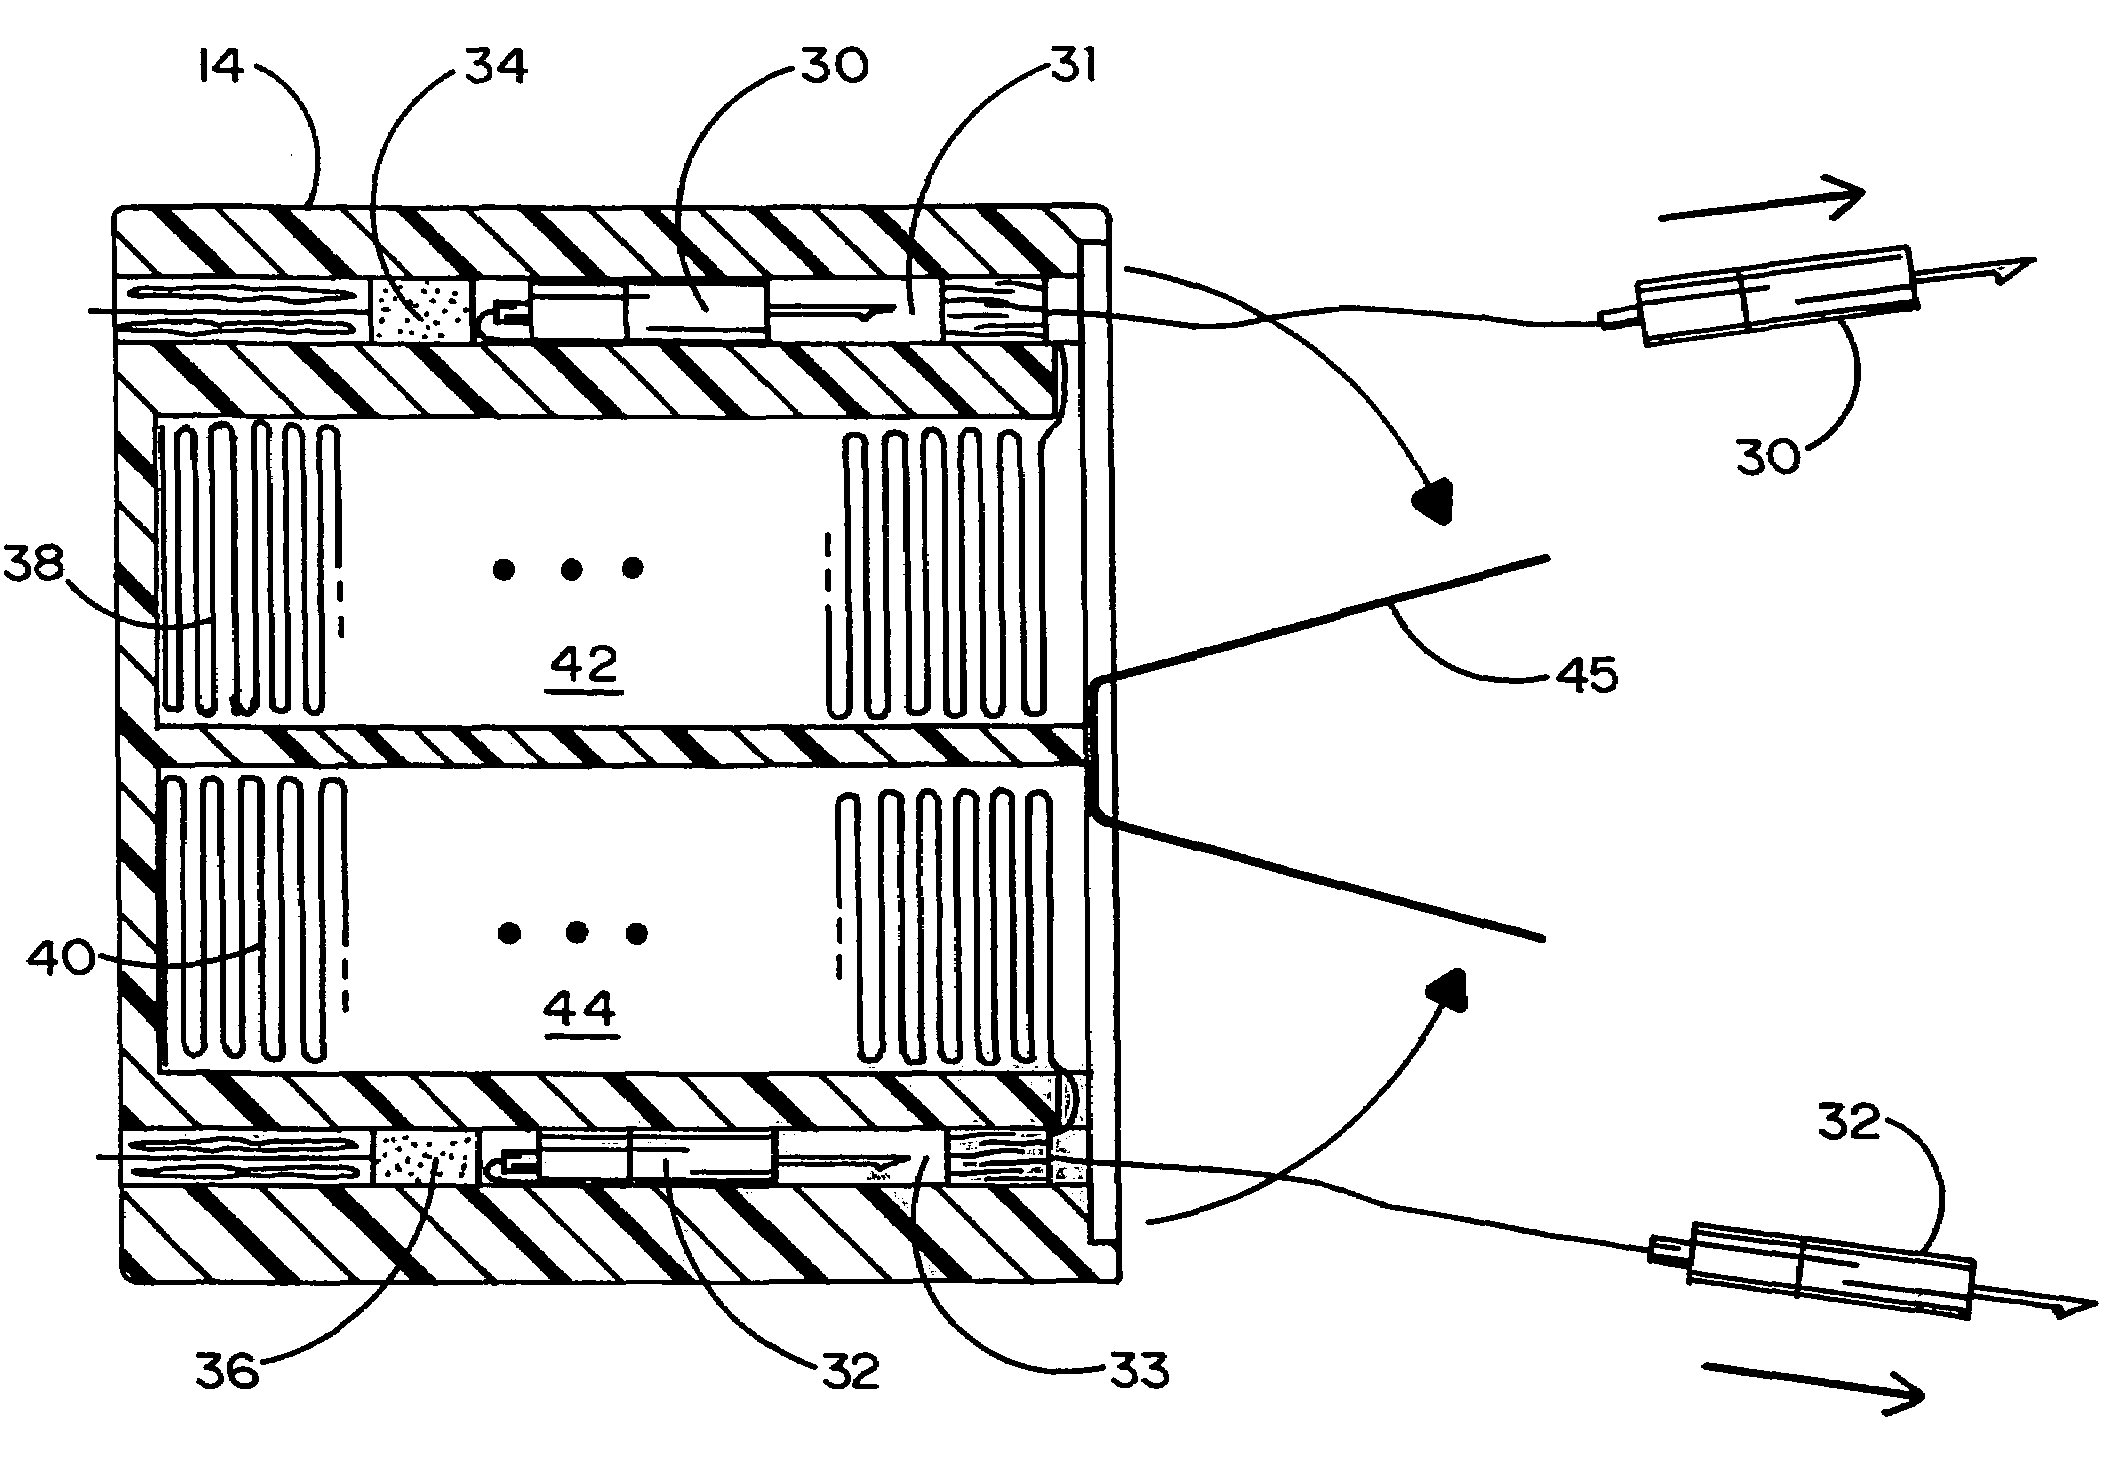 Method and apparatus for improving the effectiveness of electrical discharge weapons